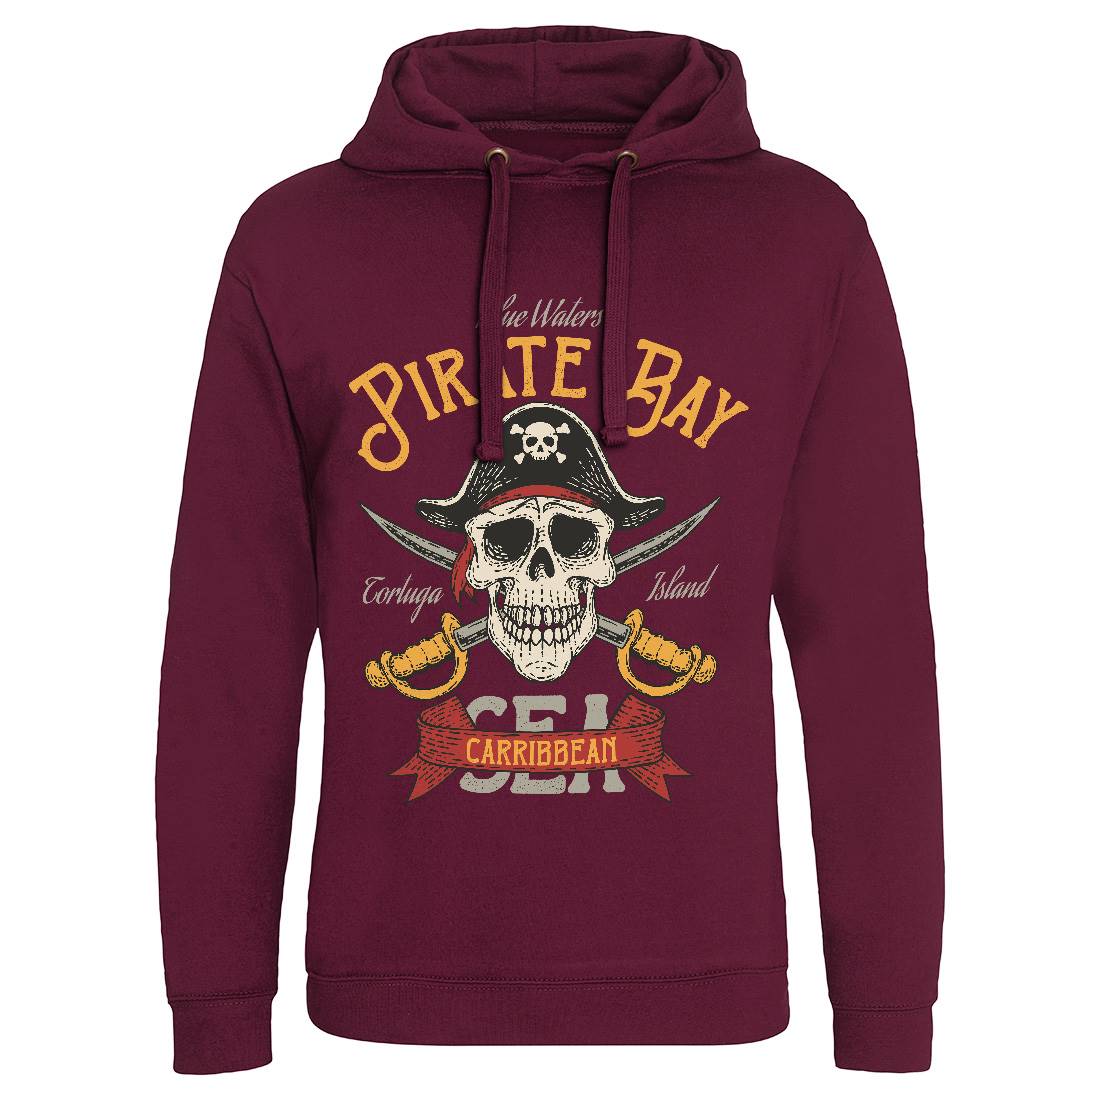 Pirate Bay Mens Hoodie Without Pocket Navy D960